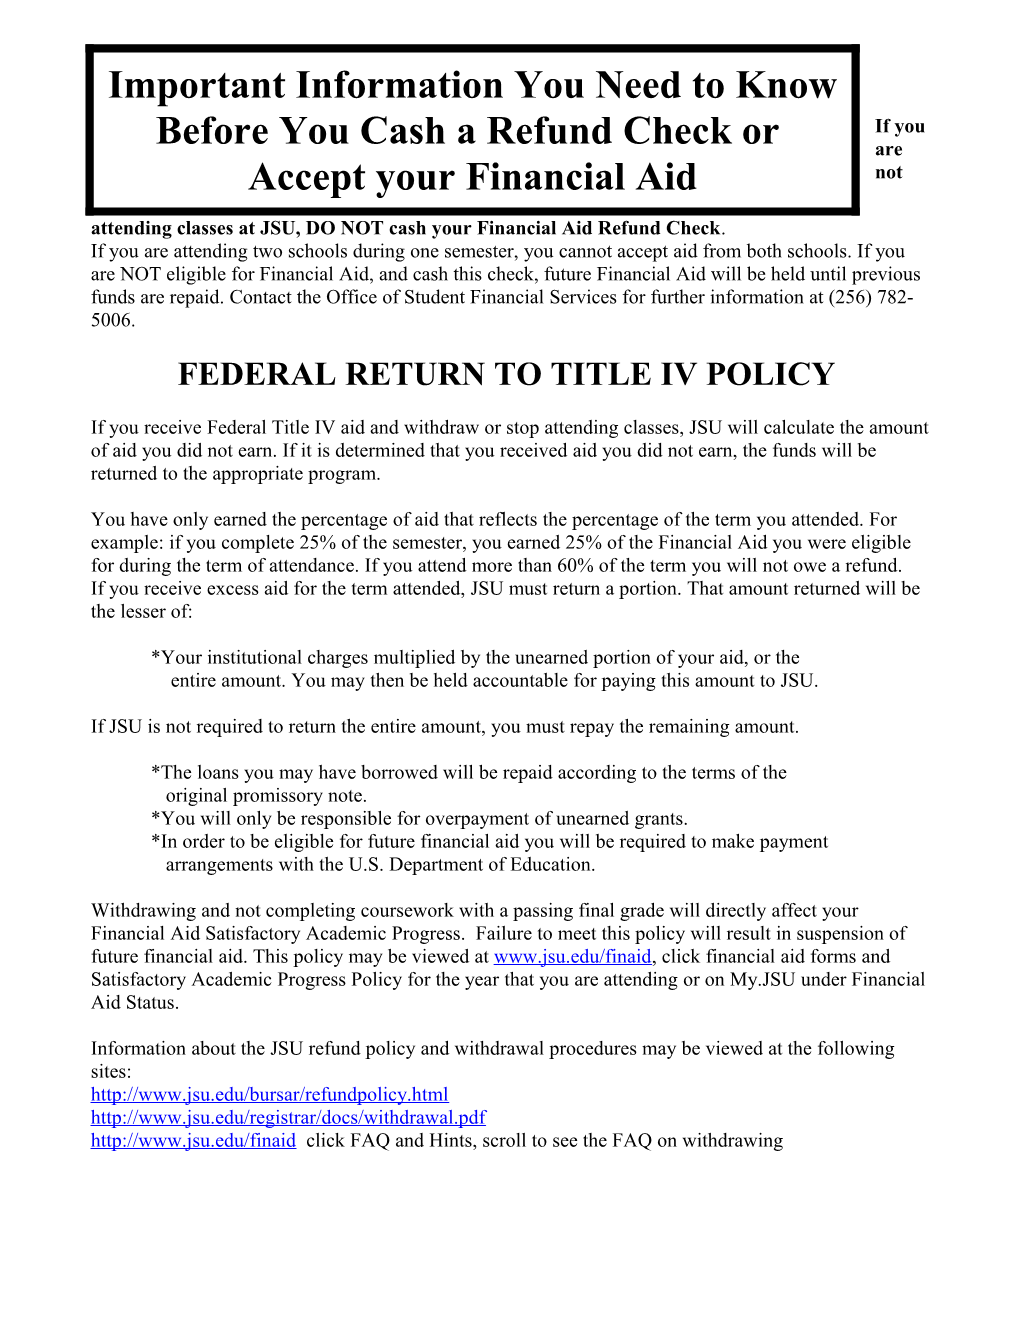 If You Are Not Attending Classes at JSU, DO NOT Cash Your Financial Aid Refund Check